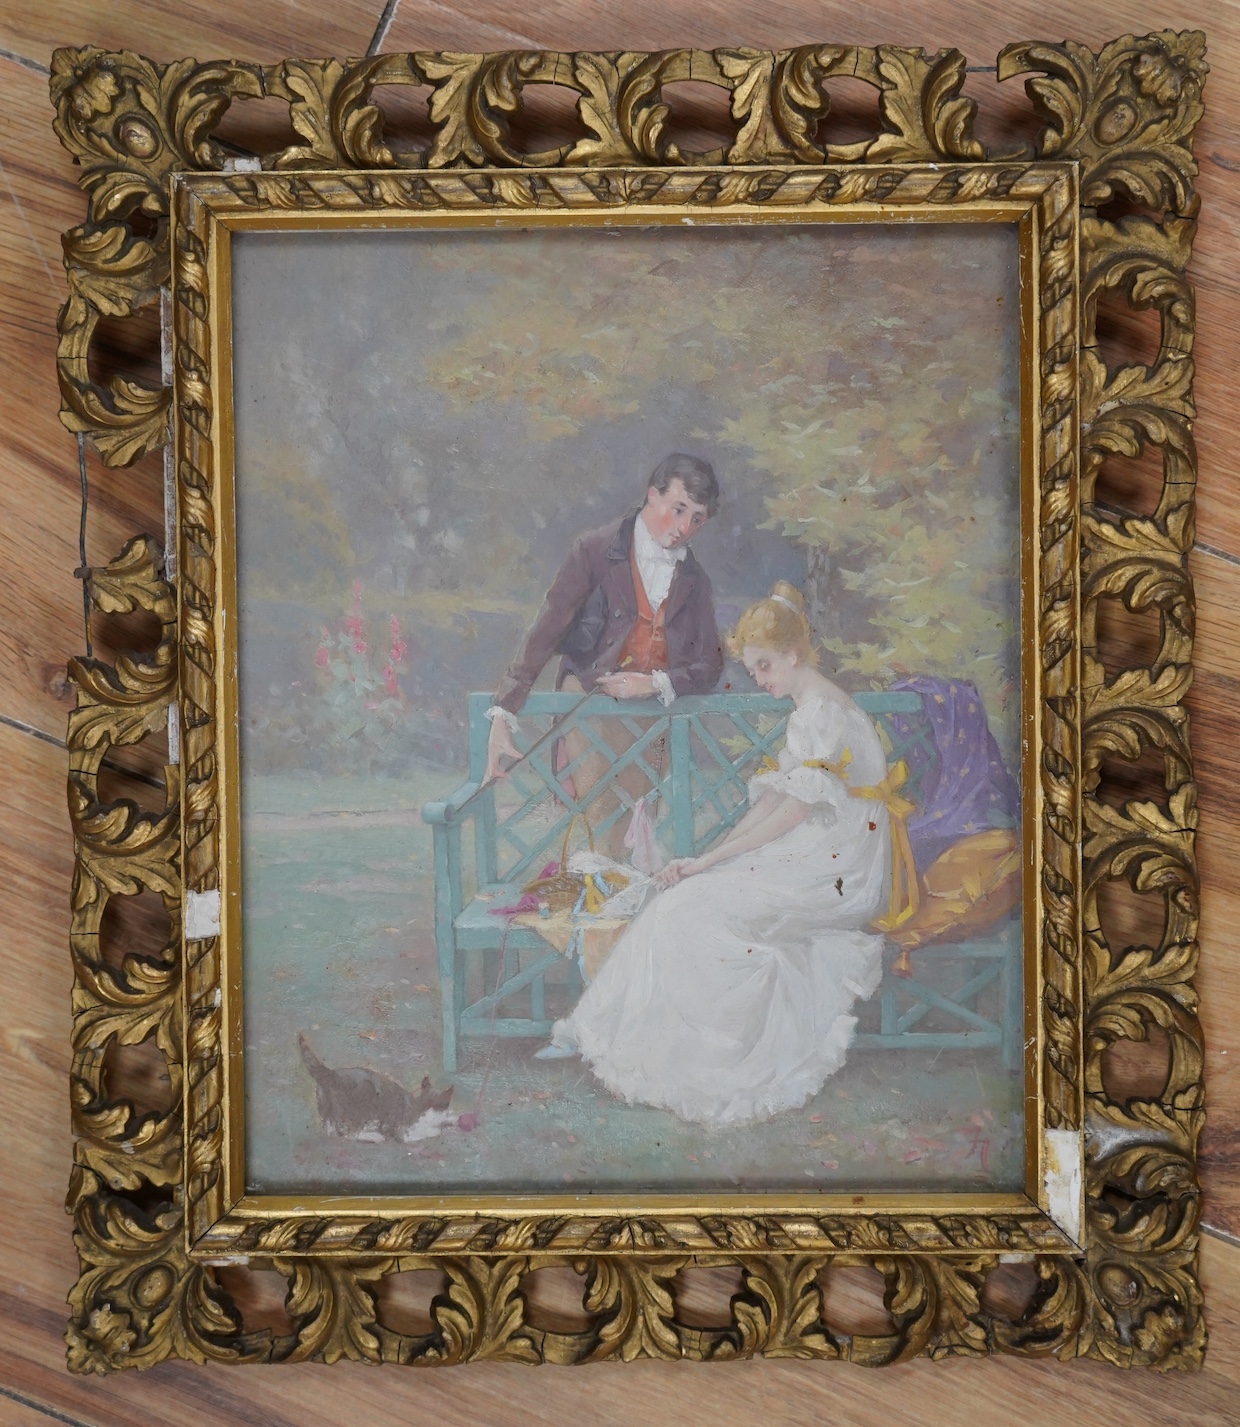 Monog, oil, 'What Will she Say', 24.5 x 19cm, ornate gilt framed. Condition - fair, losses to the frame